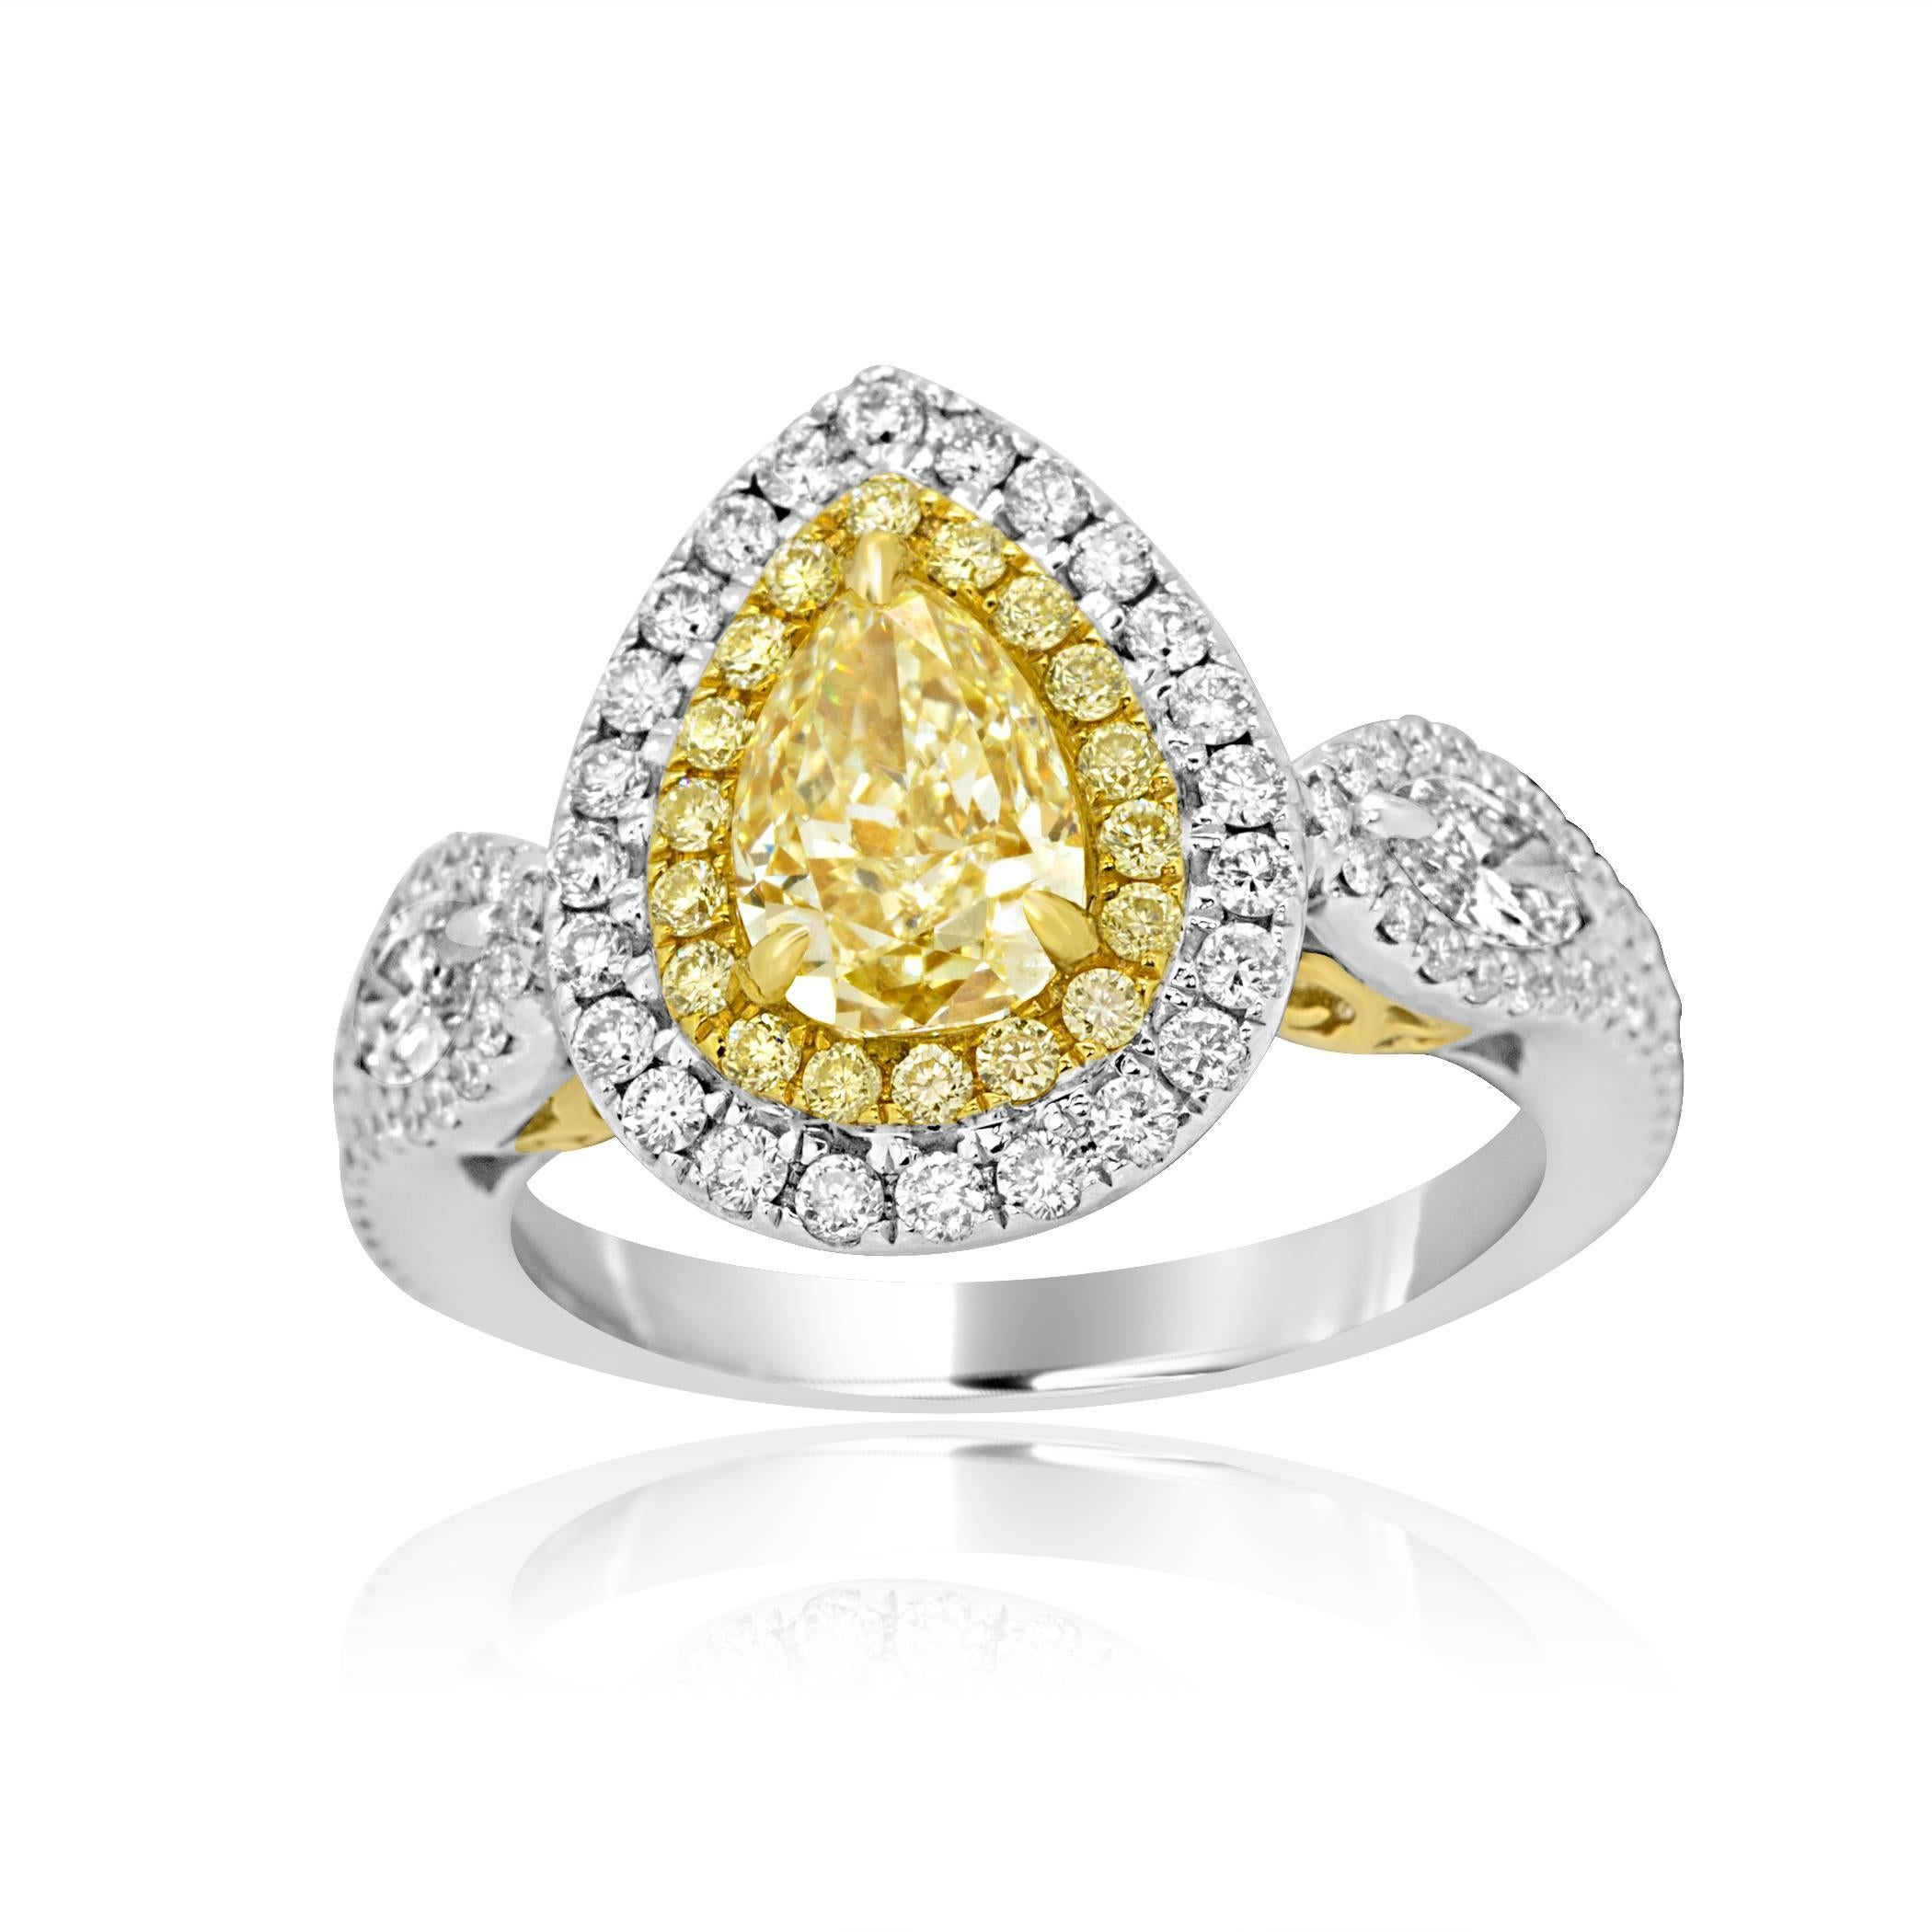 EGL USA certified Fancy Yellow VS1 1.29 Carat encircled in Double Halo of Natural Fancy yellow Diamonds 0.31 Carat and white Diamonds 0.63 Carat flanked by 2 white Diamond Marquis 0.31 Carat  in 18K White and Yellow Gold,